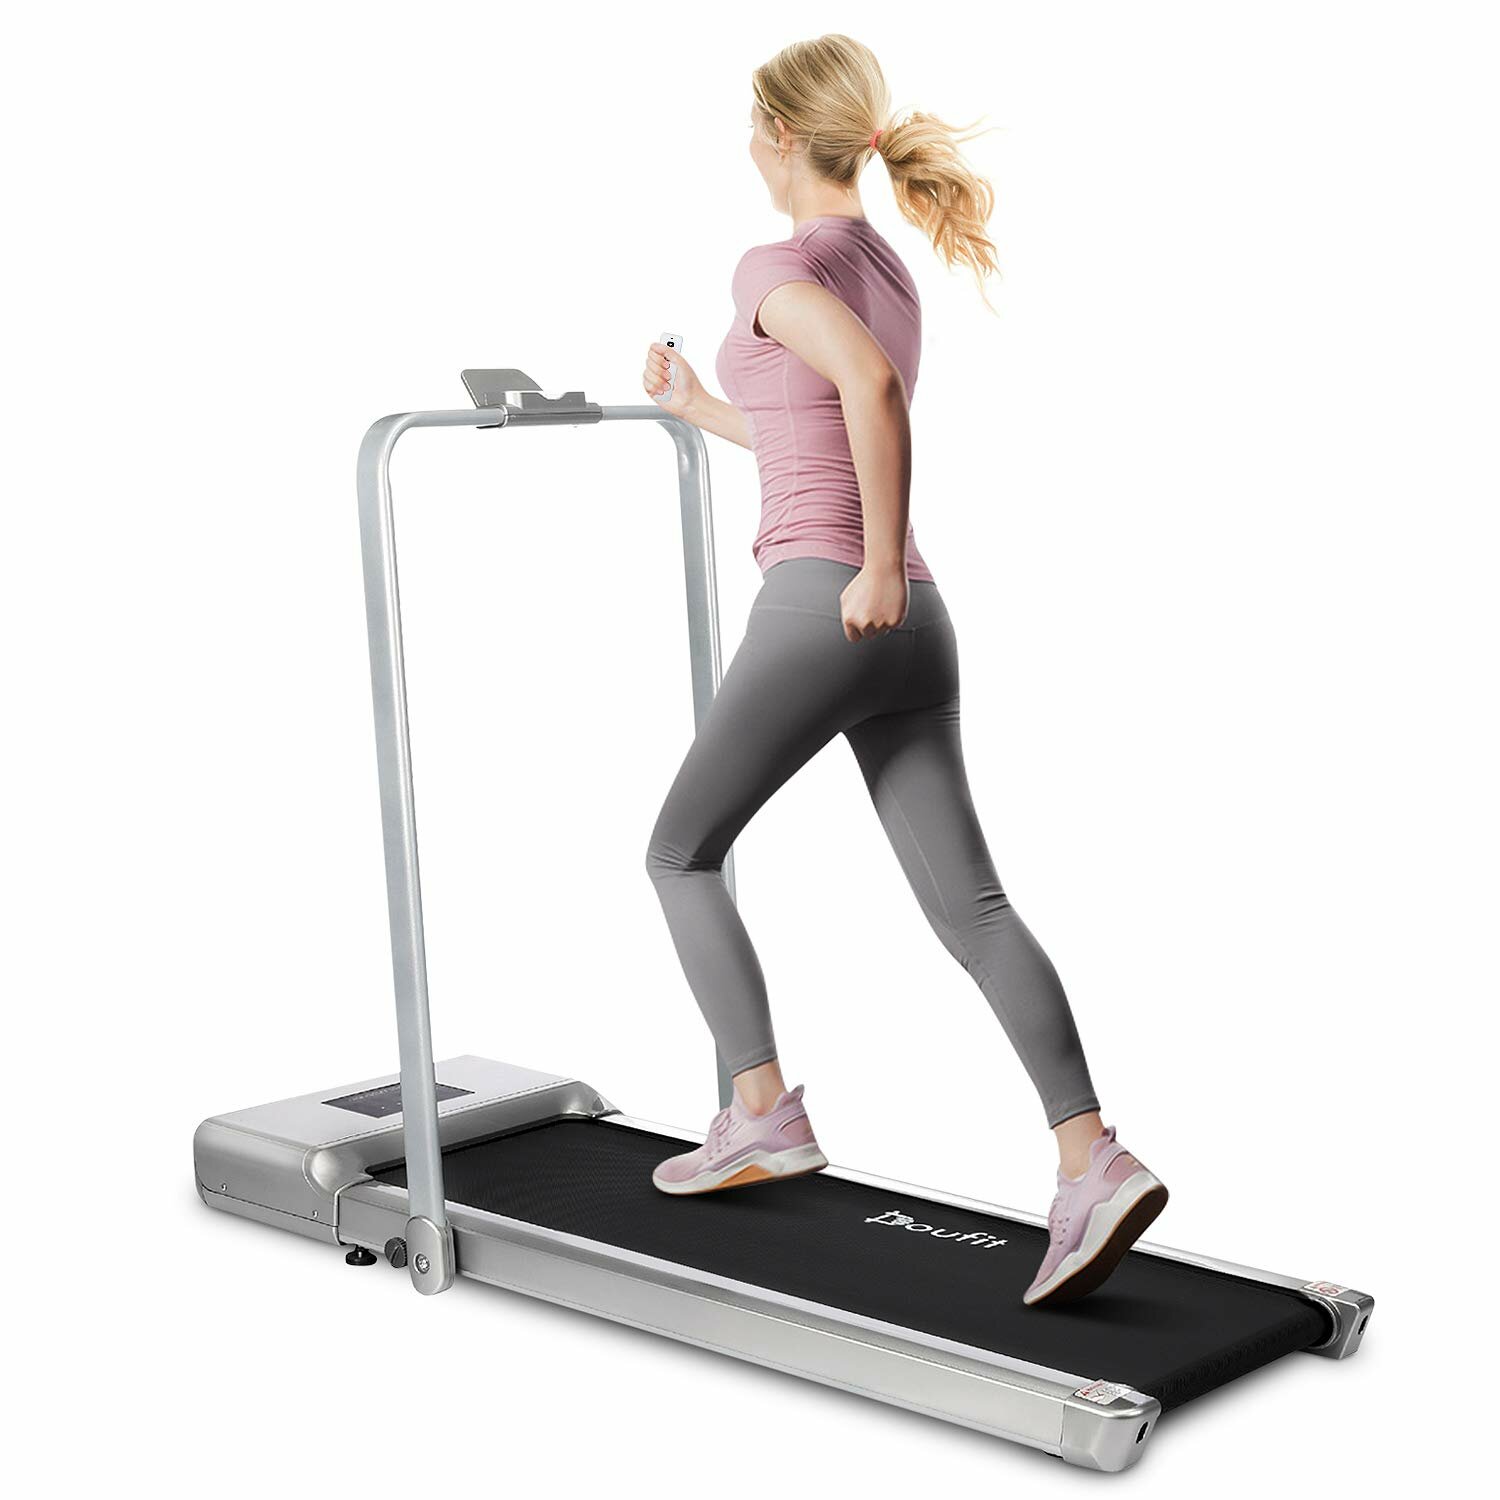 Image of Doufit TD-01 2-in-1 Folding Treadmill Walking Exercise Machine with LED Display Remote Control for Home Office Gym Fitne